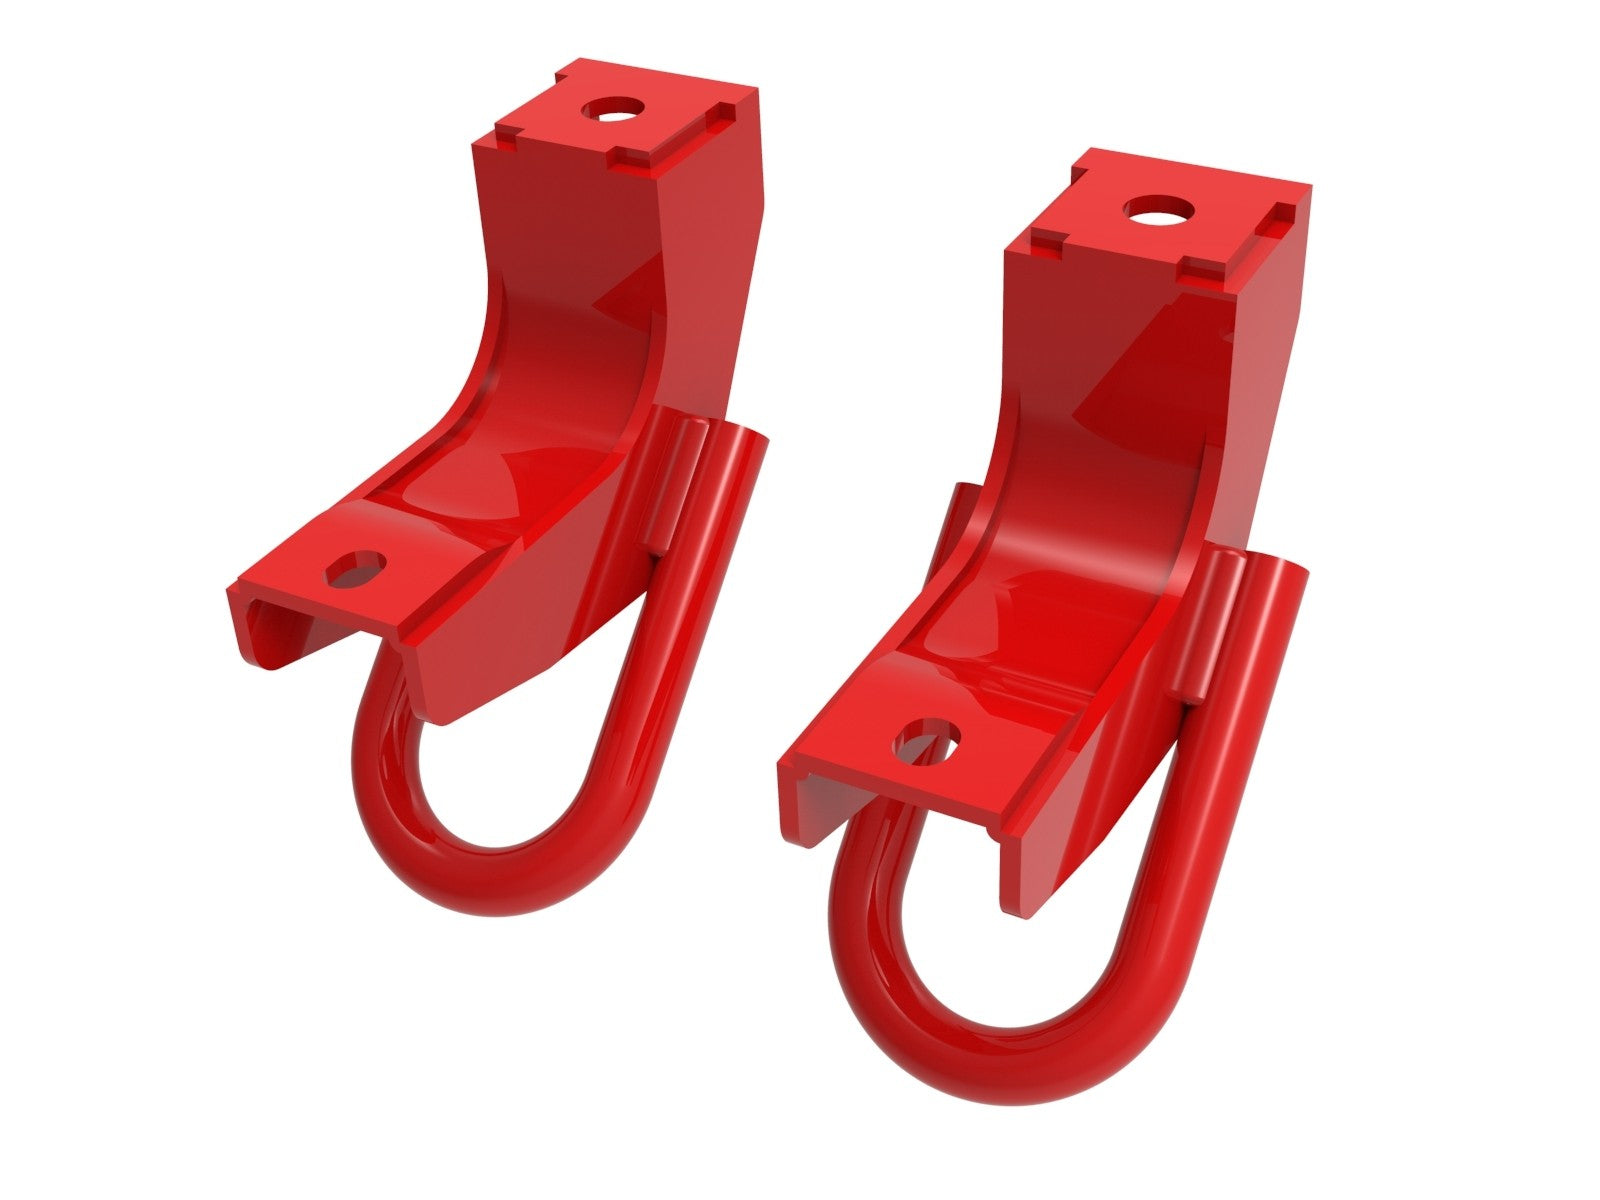 '22-23 Toyota Tundra aFe Control Red Front Tow Hooks (front side)